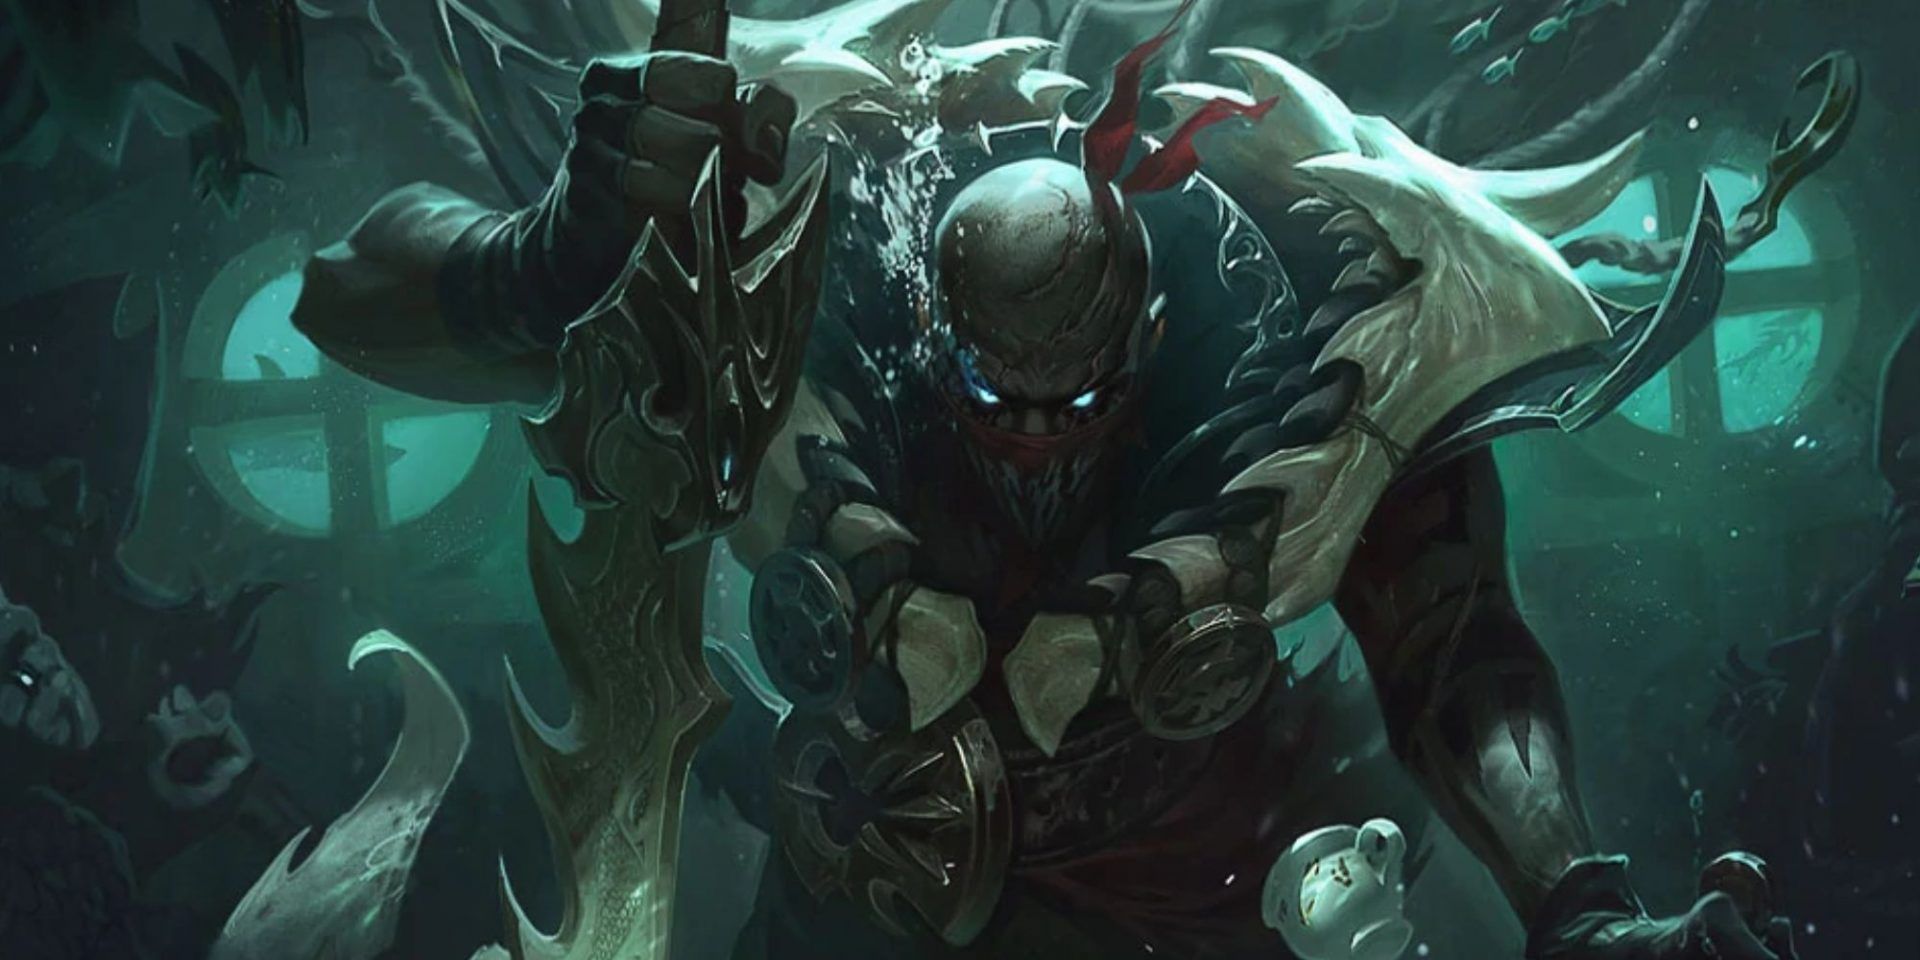 Splash for from League of Legends for the champion Pyke